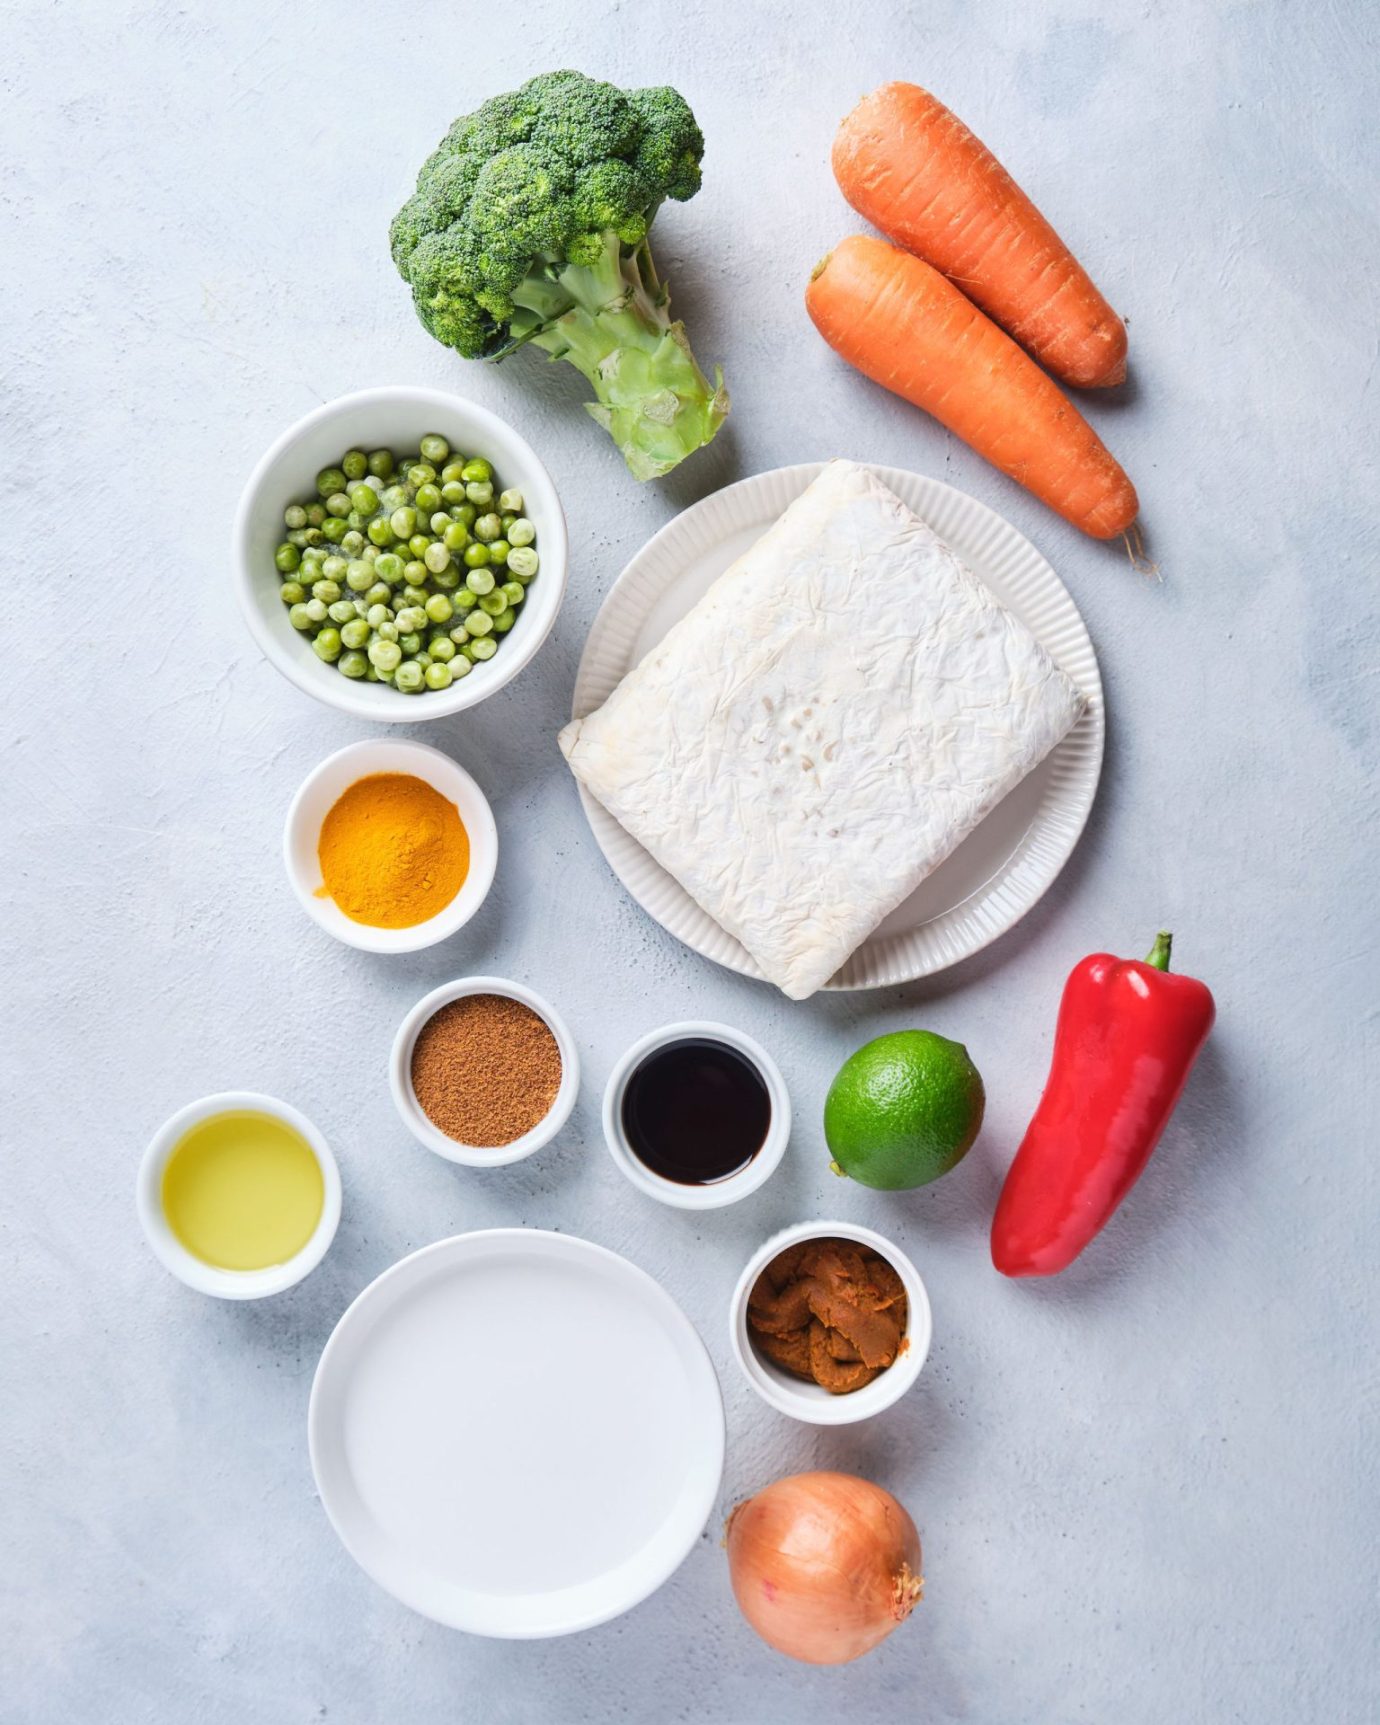 Ingredients to make yellow curry with tempeh including vegetables, curry paste and tempeh